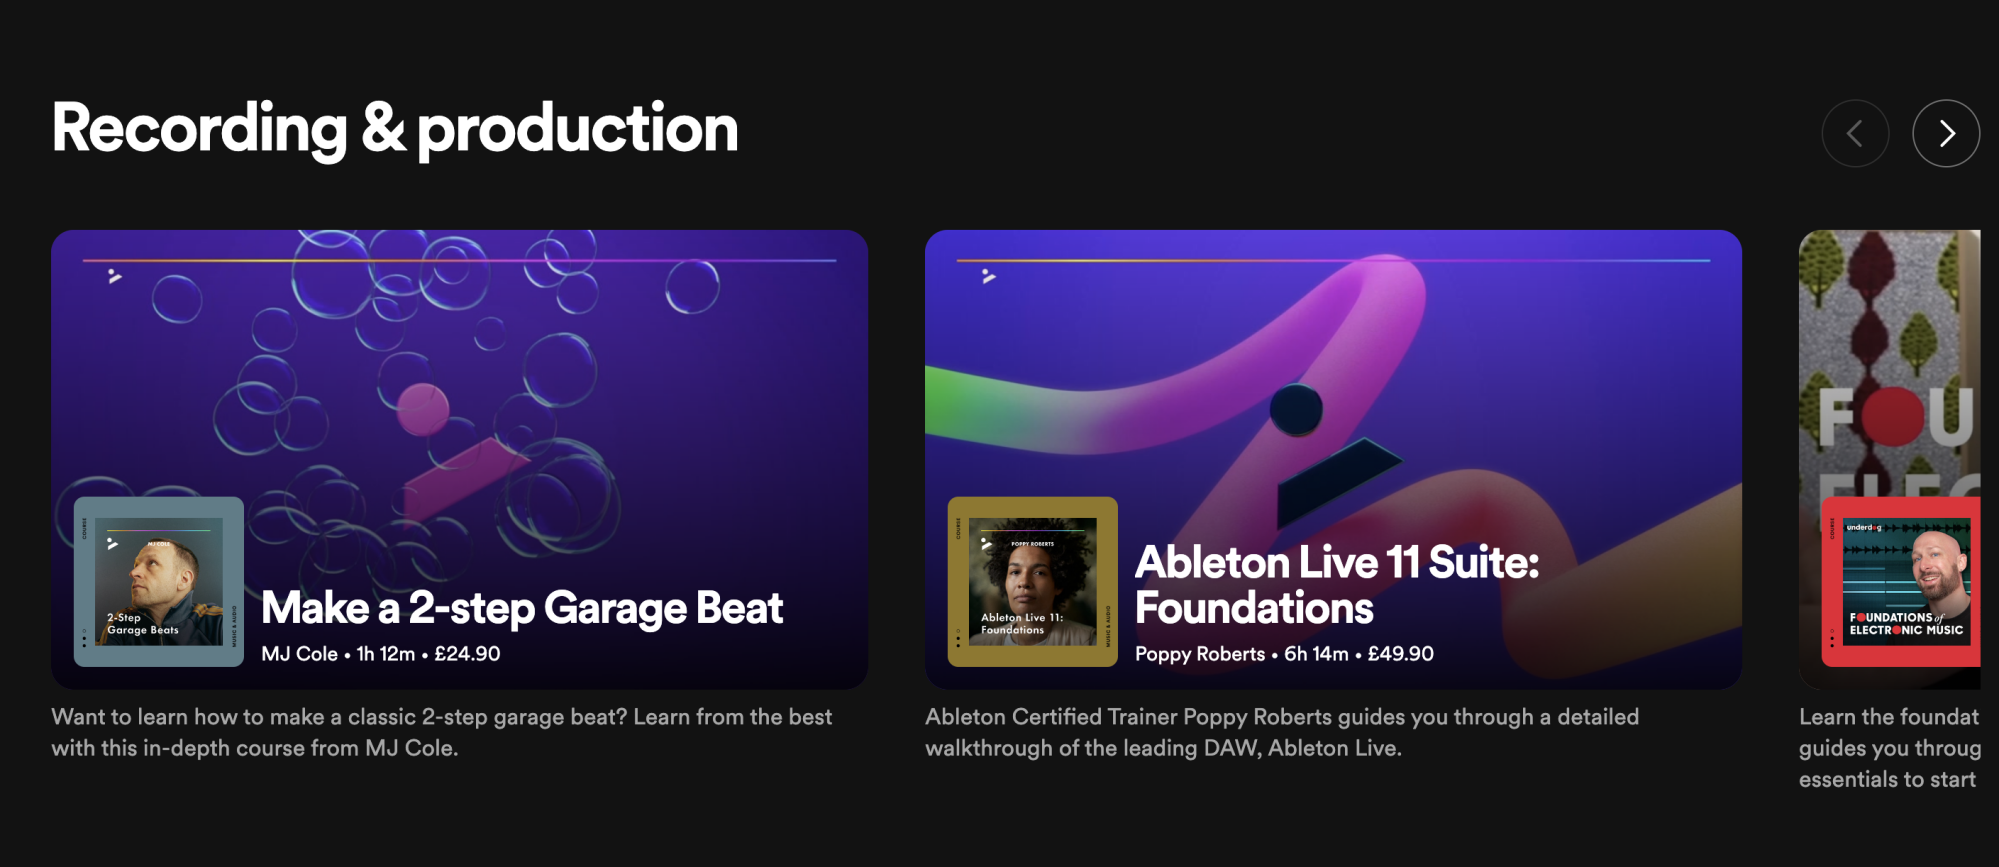 A screenshot of Spotify's courses for recording and production.